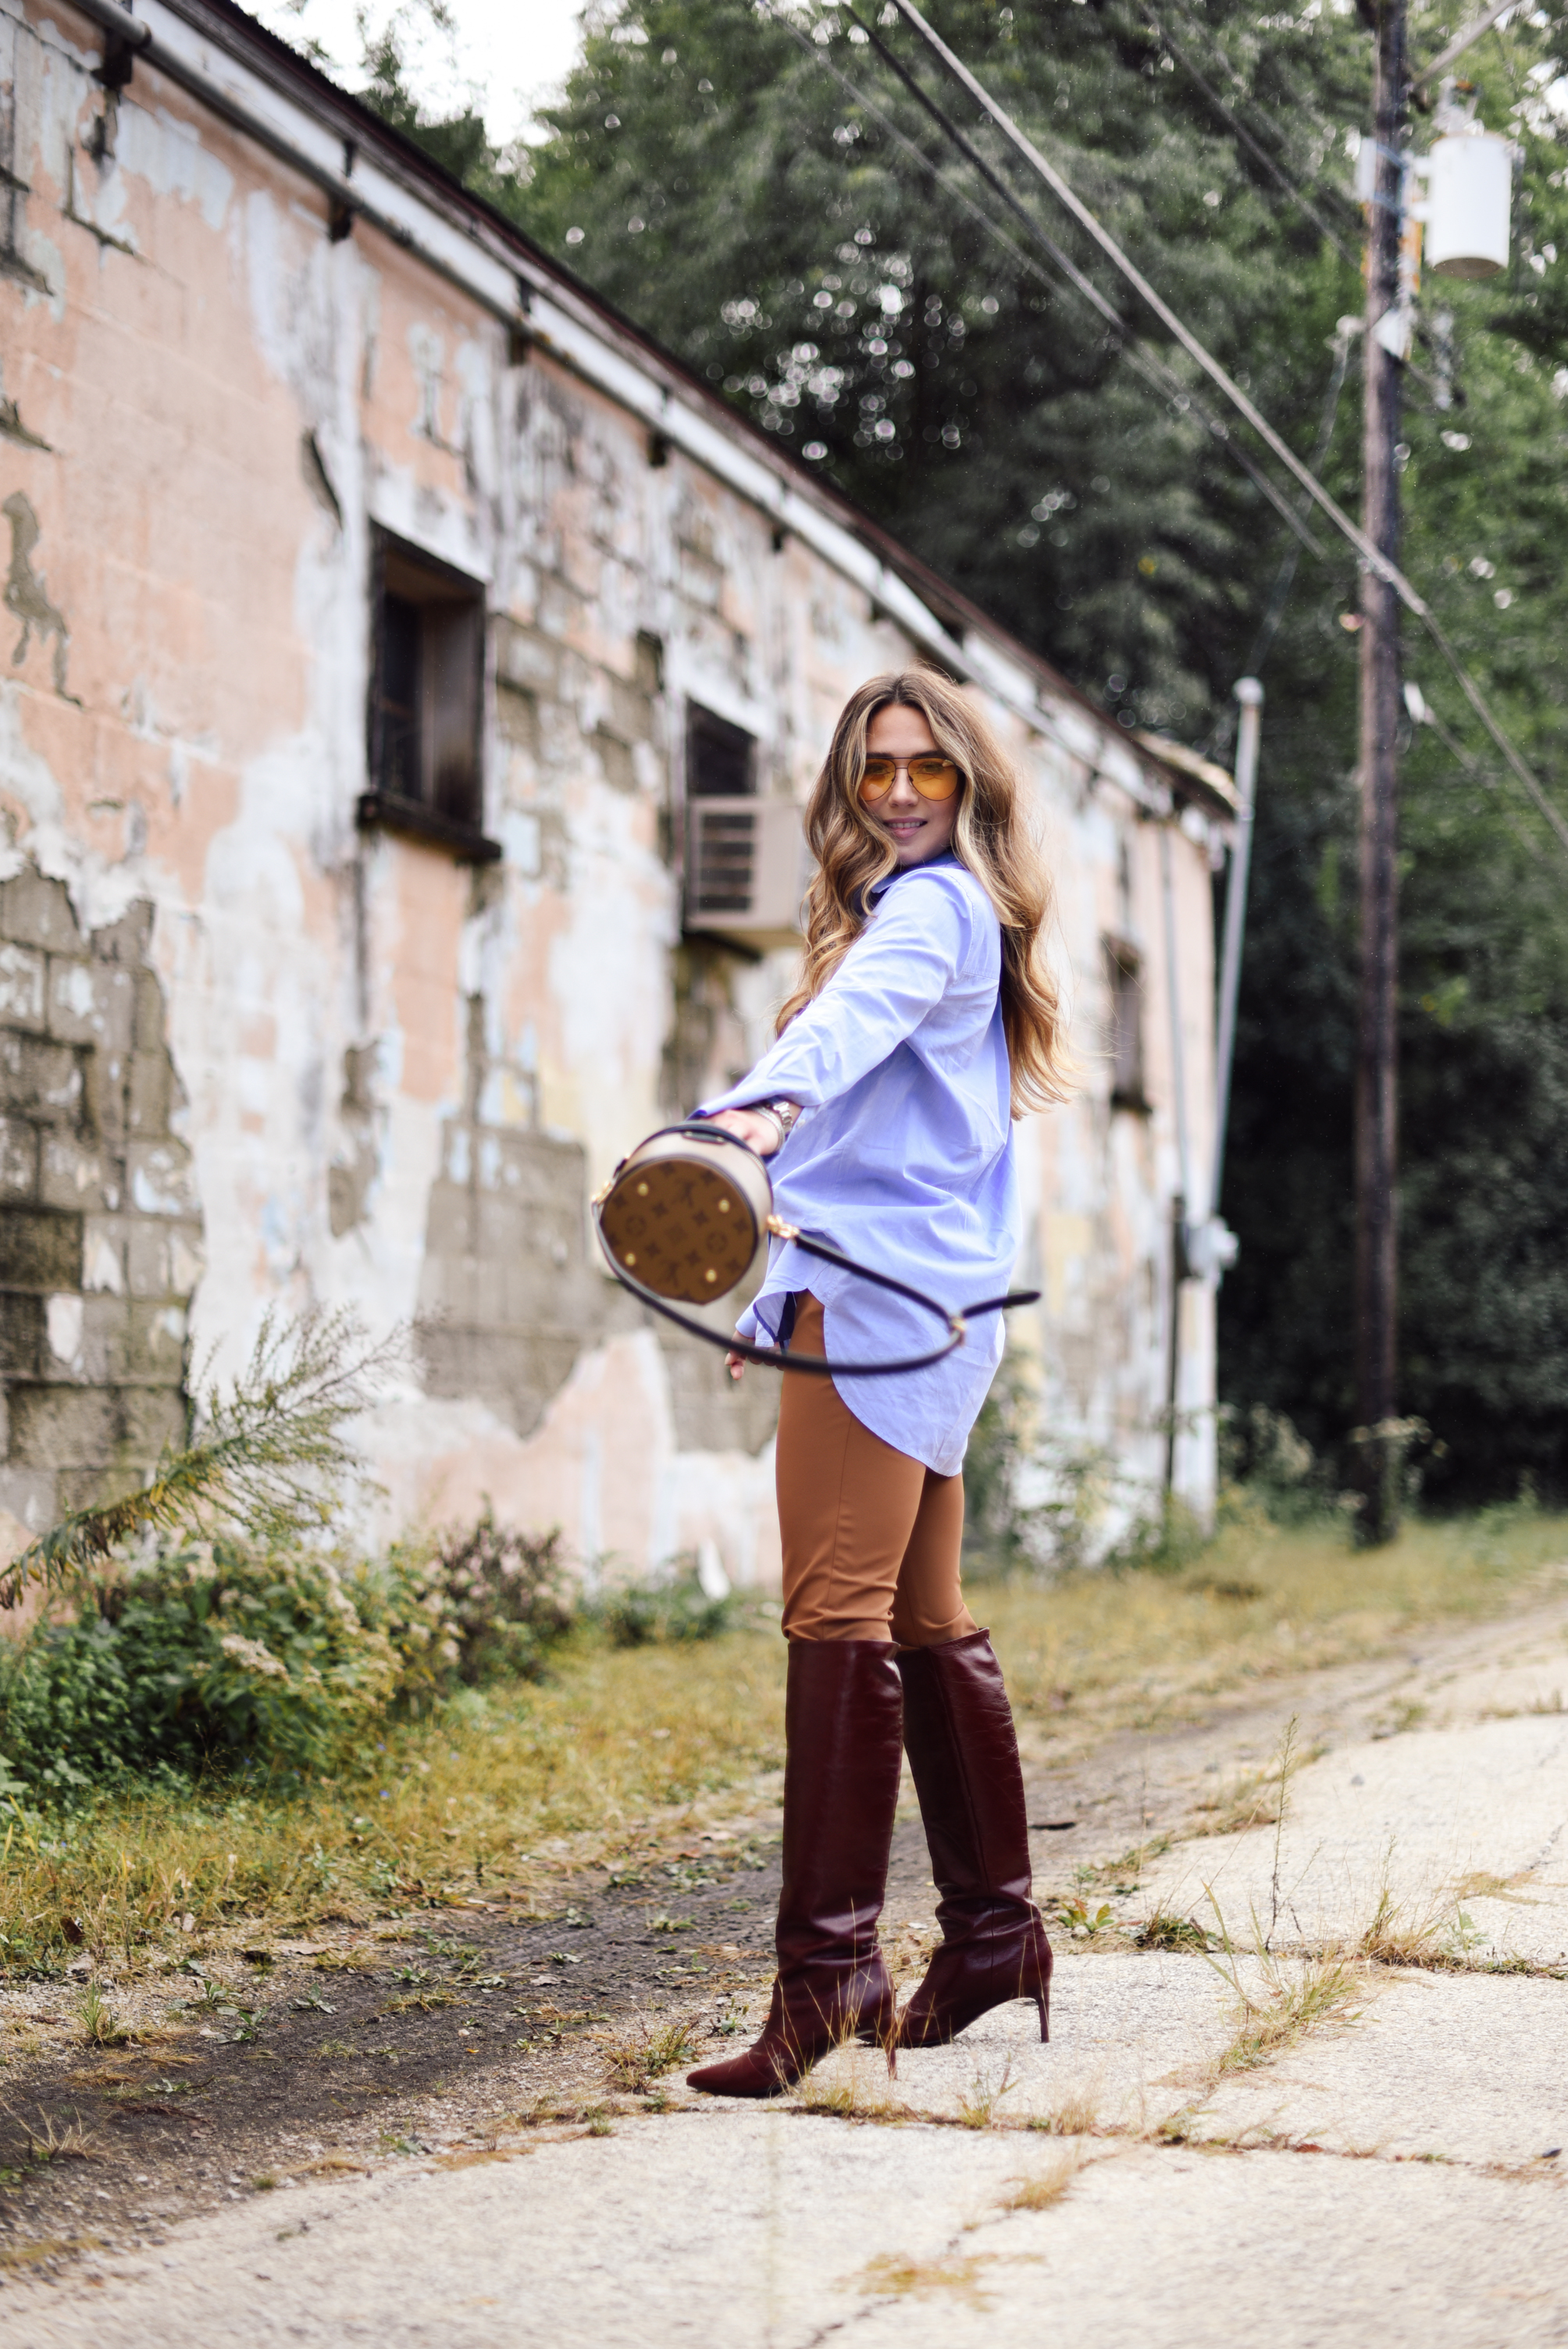 white-leather-jacket-button-up-shirt-blue-knee-high-maroon-boot-bucket-bag-fall-outfit-inspo-street-style-look